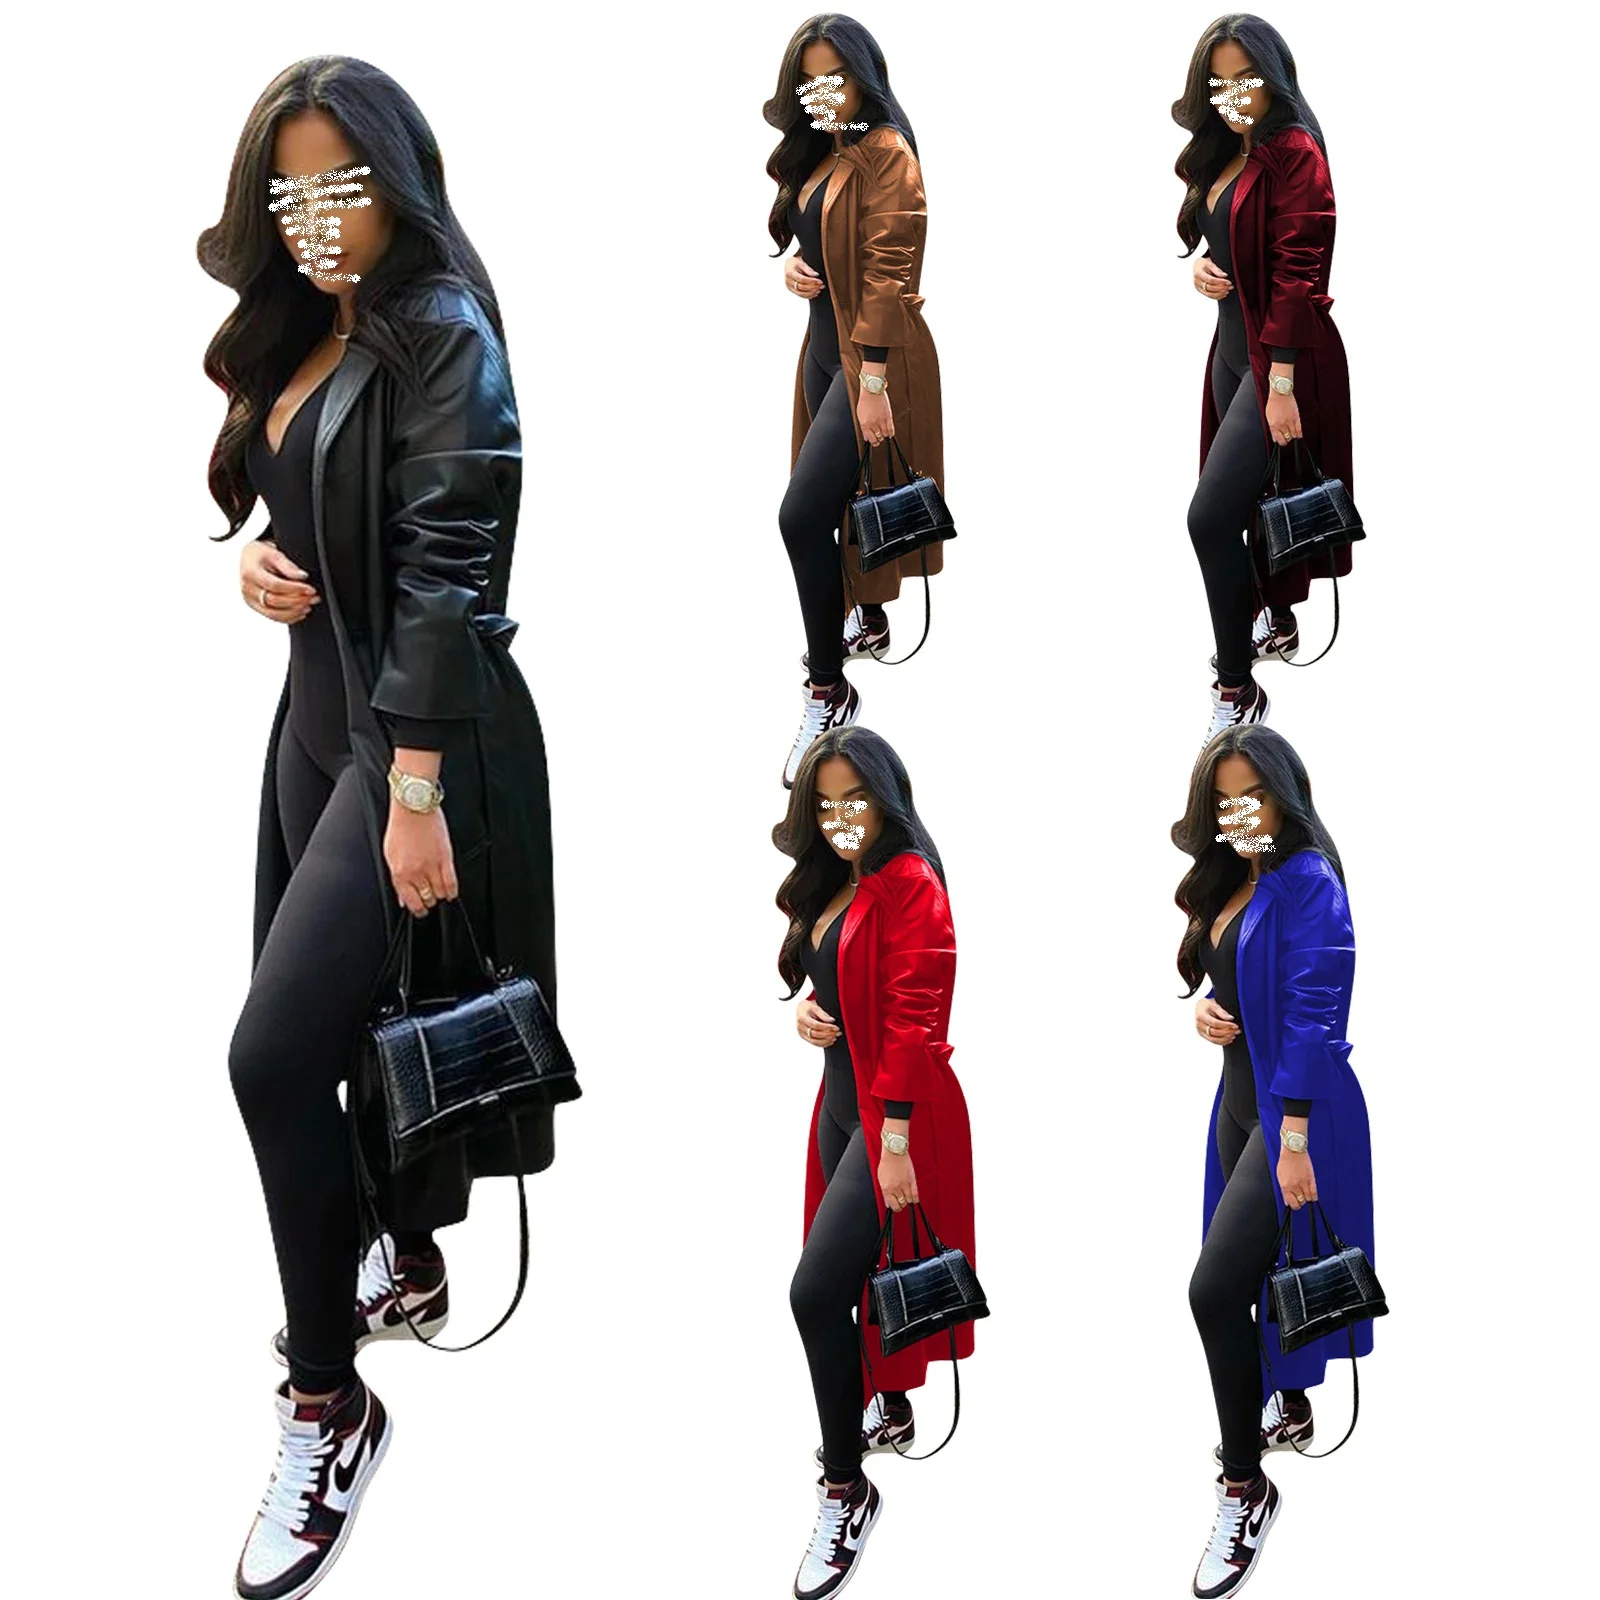 

Sexy Pu Leather Trench Coat for Women Belted Fall Winter Clothes Fashion Streetwear Long Coat Cardigan Night Club Jacket Autumn